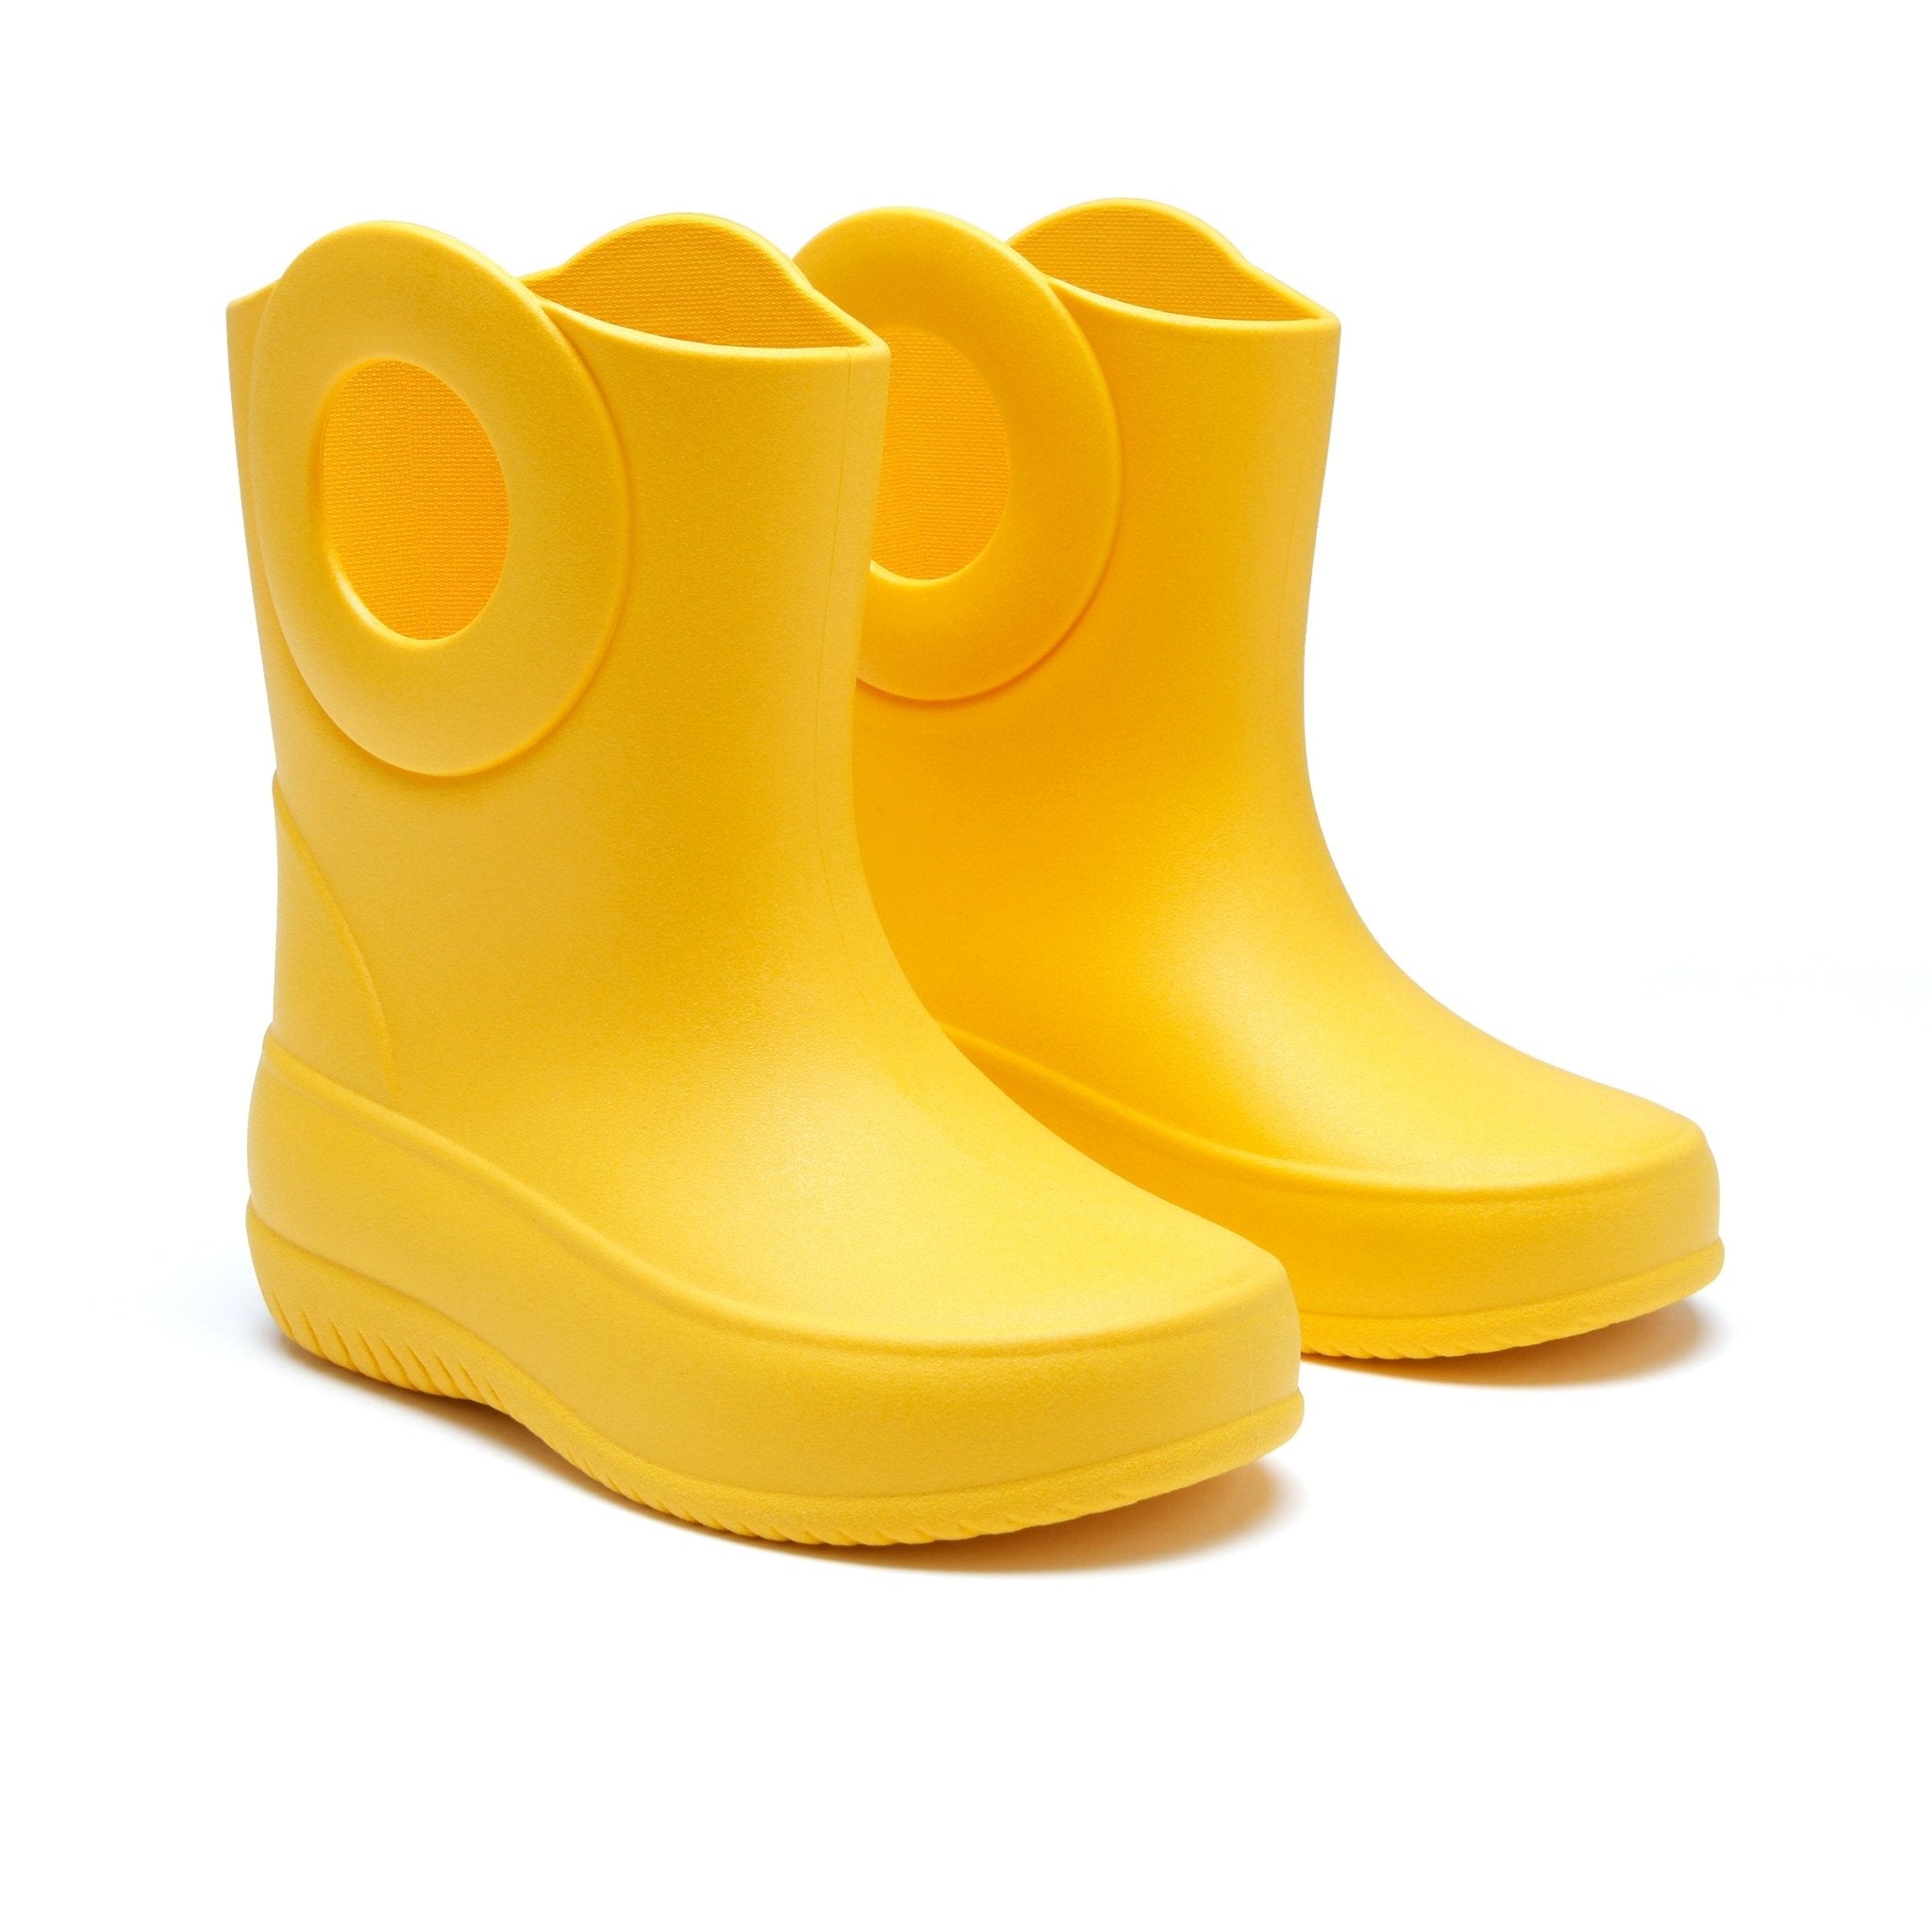 Toddler Kendall Rain Boots Yellow 5 374173 ?v=1655751736